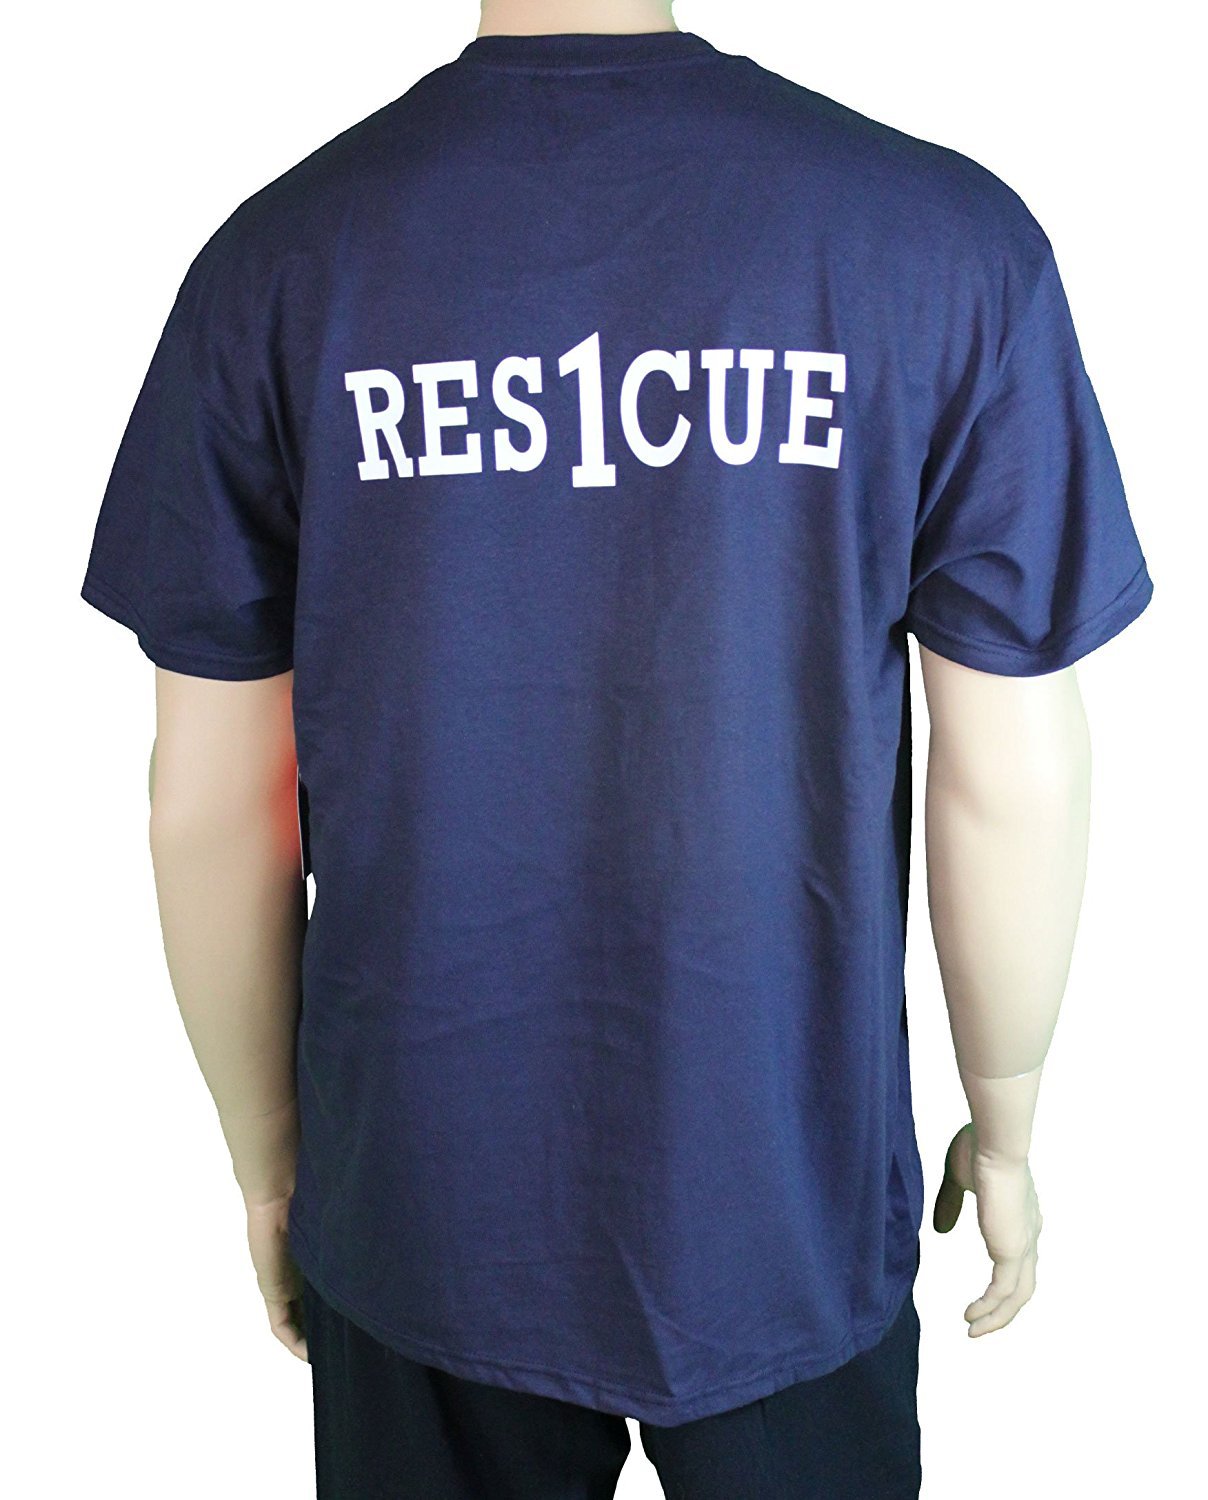 FDNY Short Sleeve with Rescue Print on back T-Shirt Navy